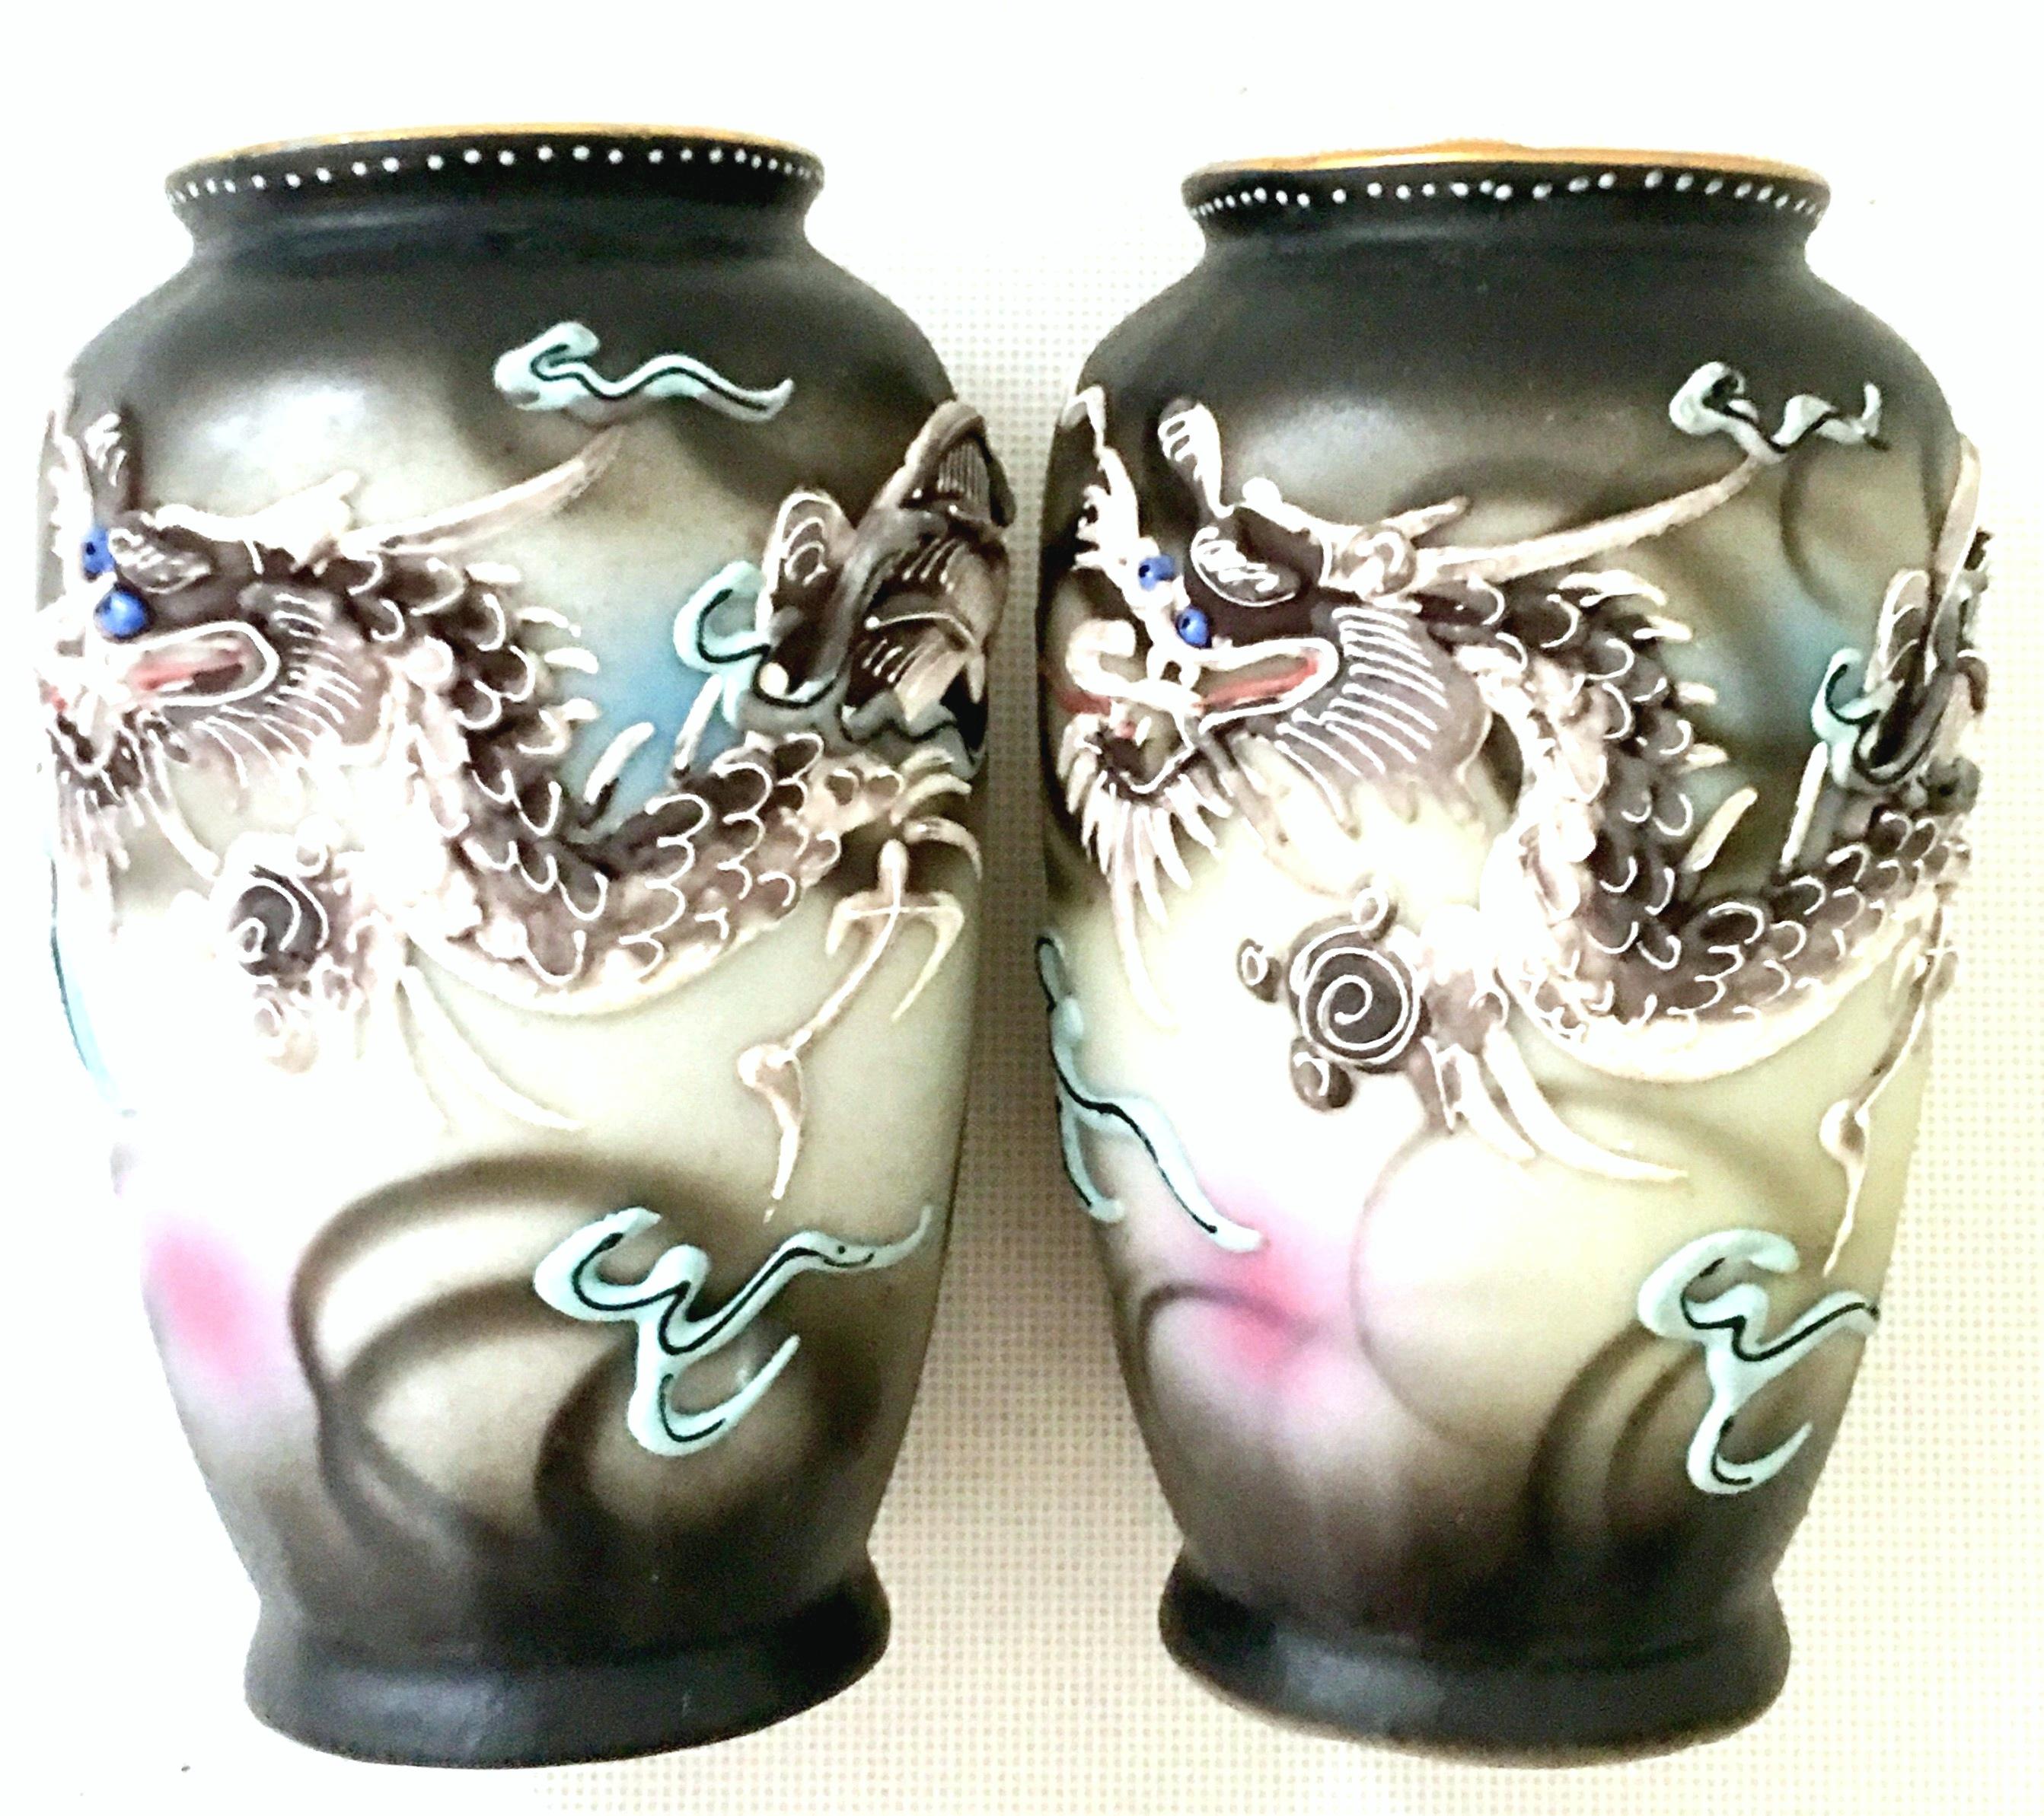 Mid-20th century Japanese porcelain hand-painted Moriage dragon ware pair of bud vases. Each vase is signed on the underside, hand-painted-made in occupied Japan.